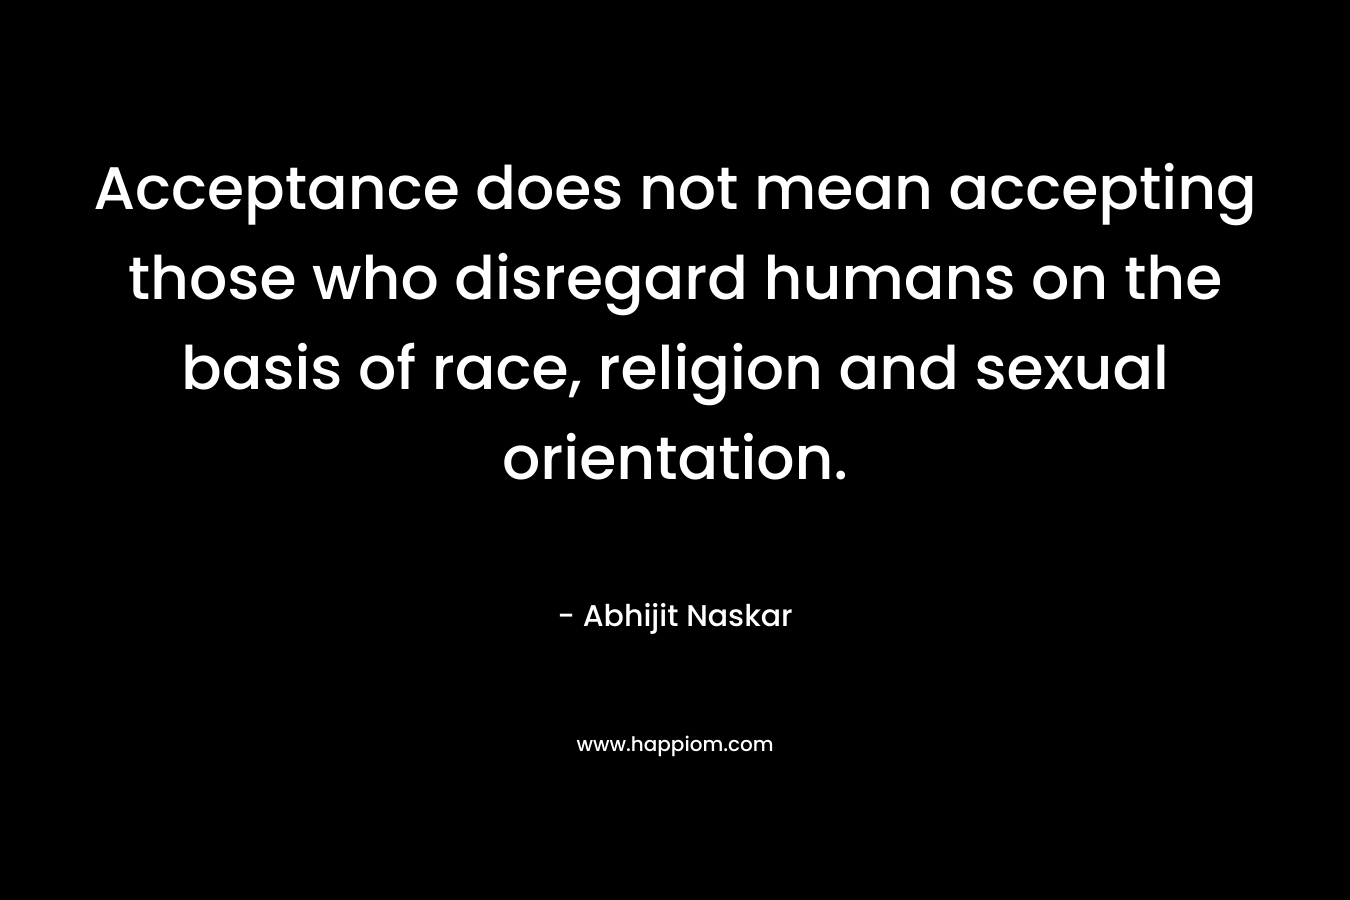 Acceptance does not mean accepting those who disregard humans on the basis of race, religion and sexual orientation.